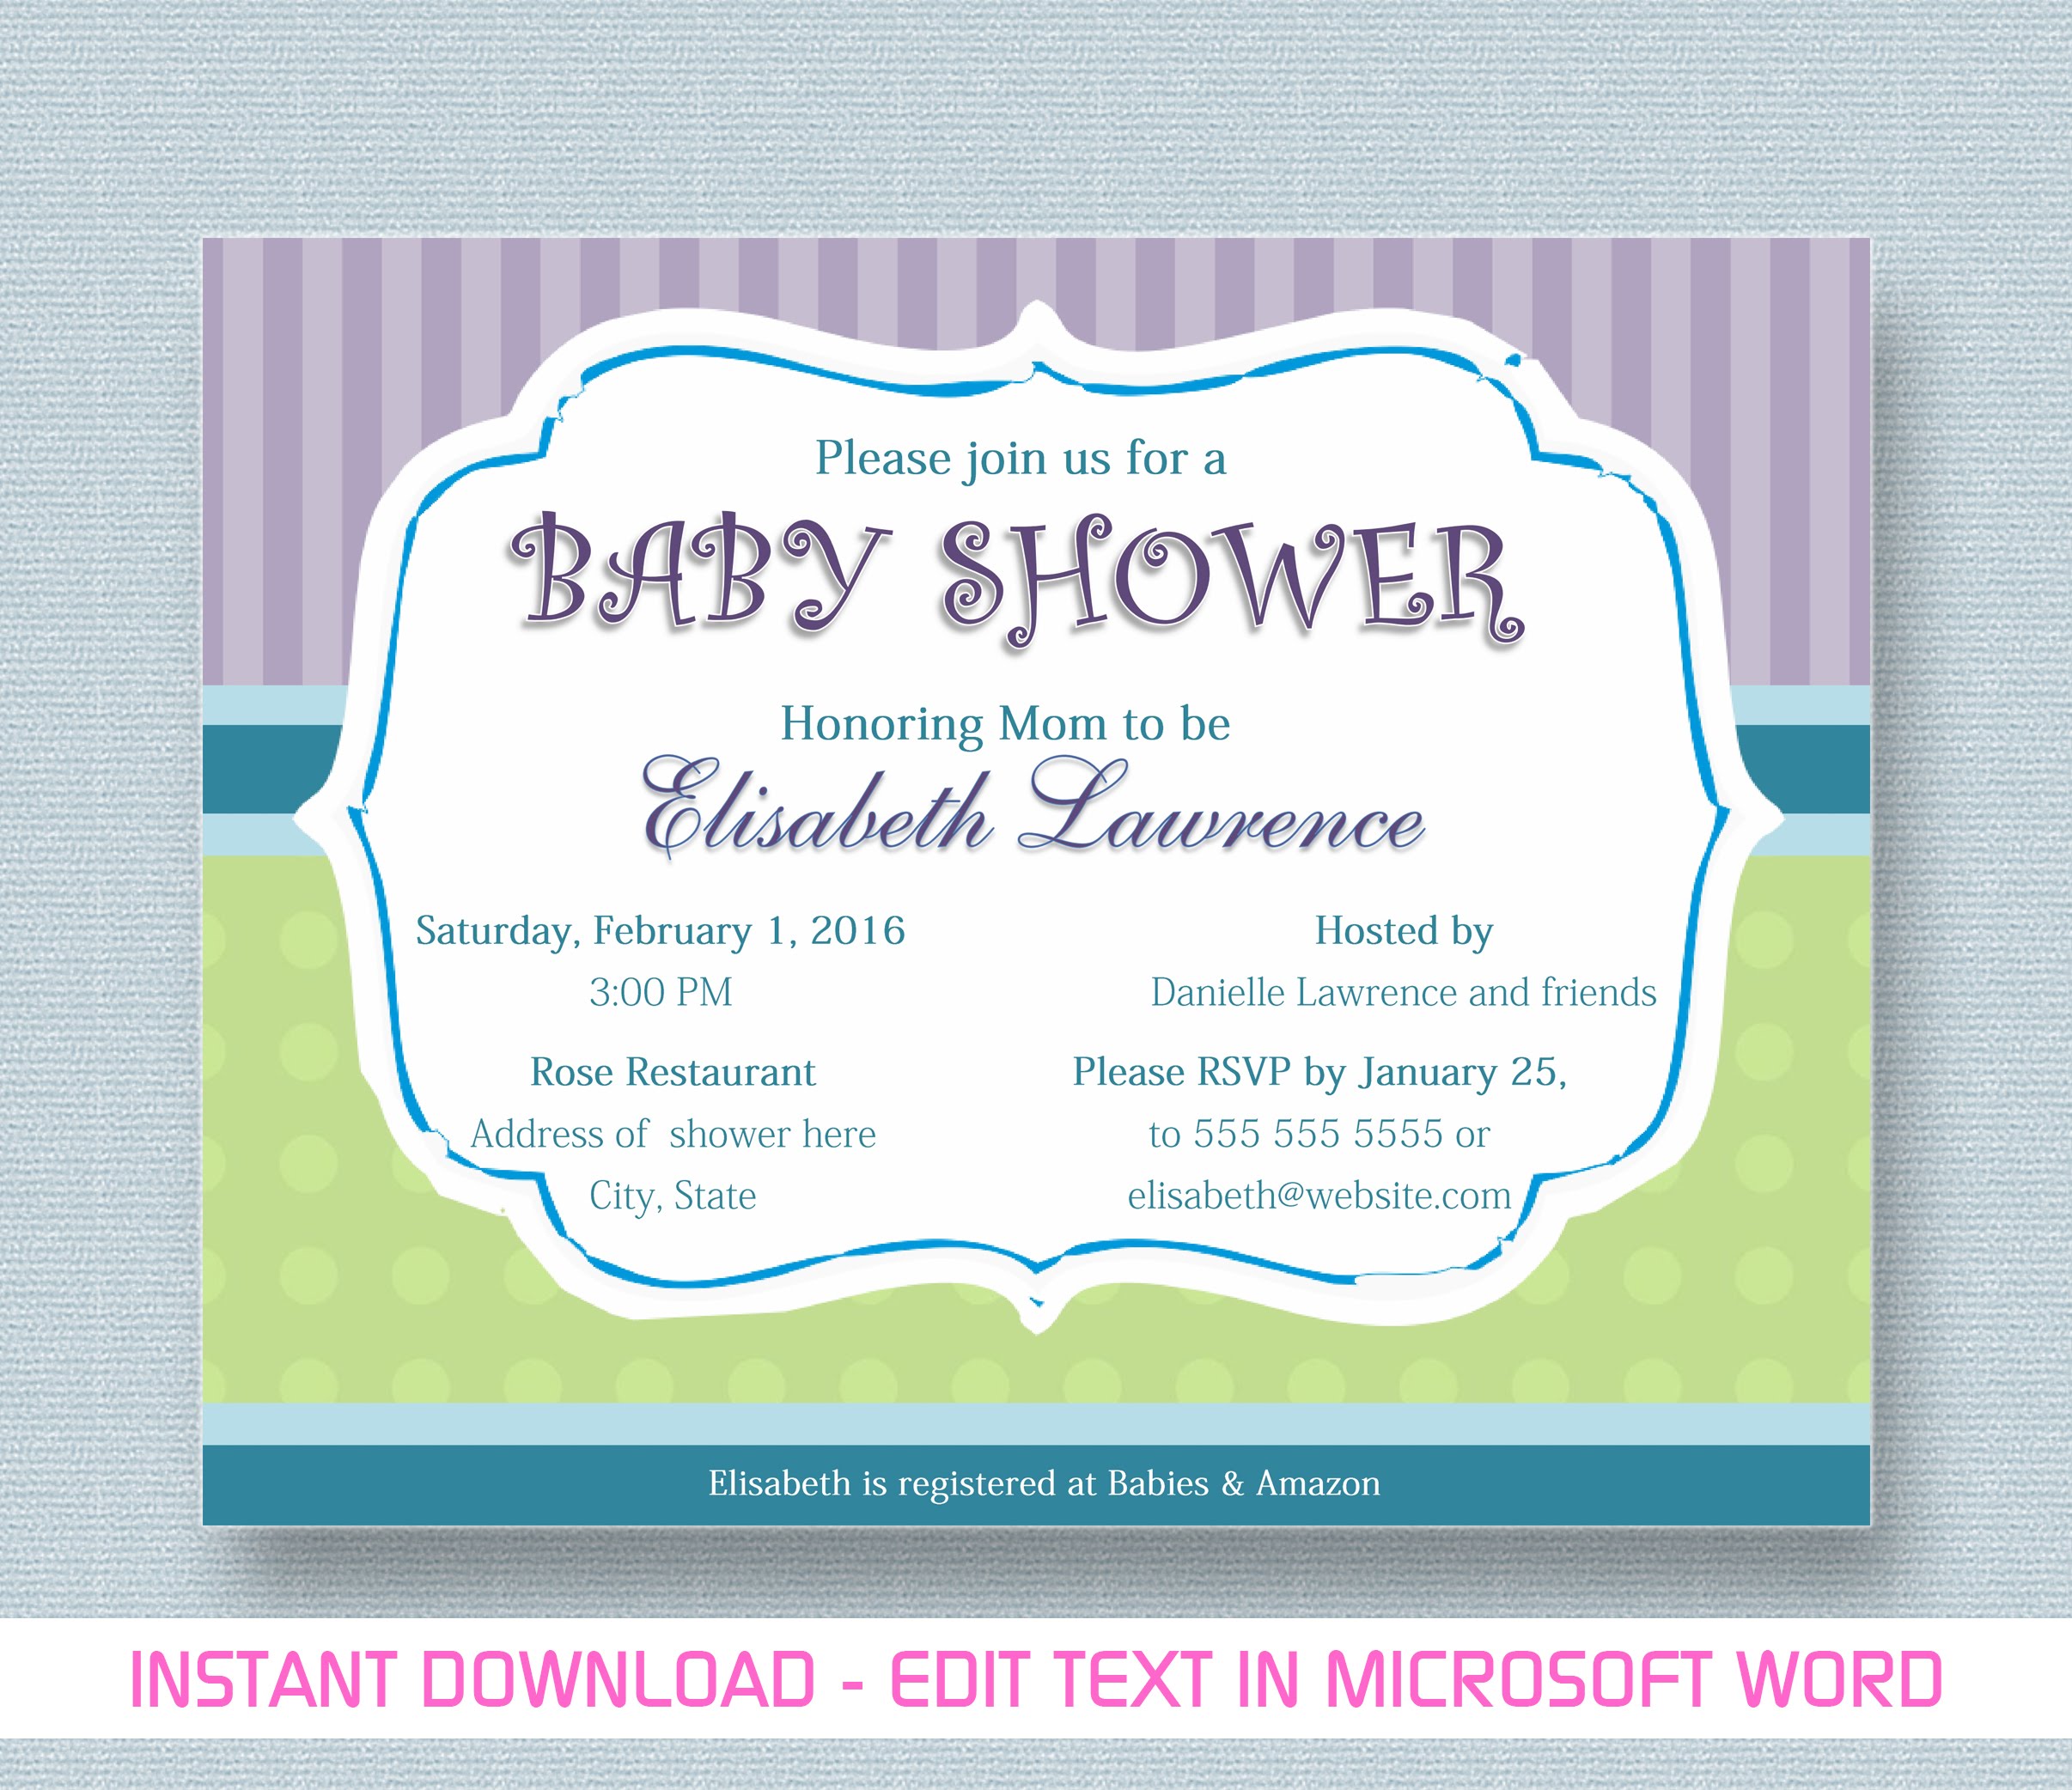 Full Size of Baby Shower:sturdy Baby Shower Invitation Template Image Concepts Save The Date Baby Shower Baby Shower Para Niño Baby Shower Rentals Baby Shower Registry Baby Shower Favors To Make